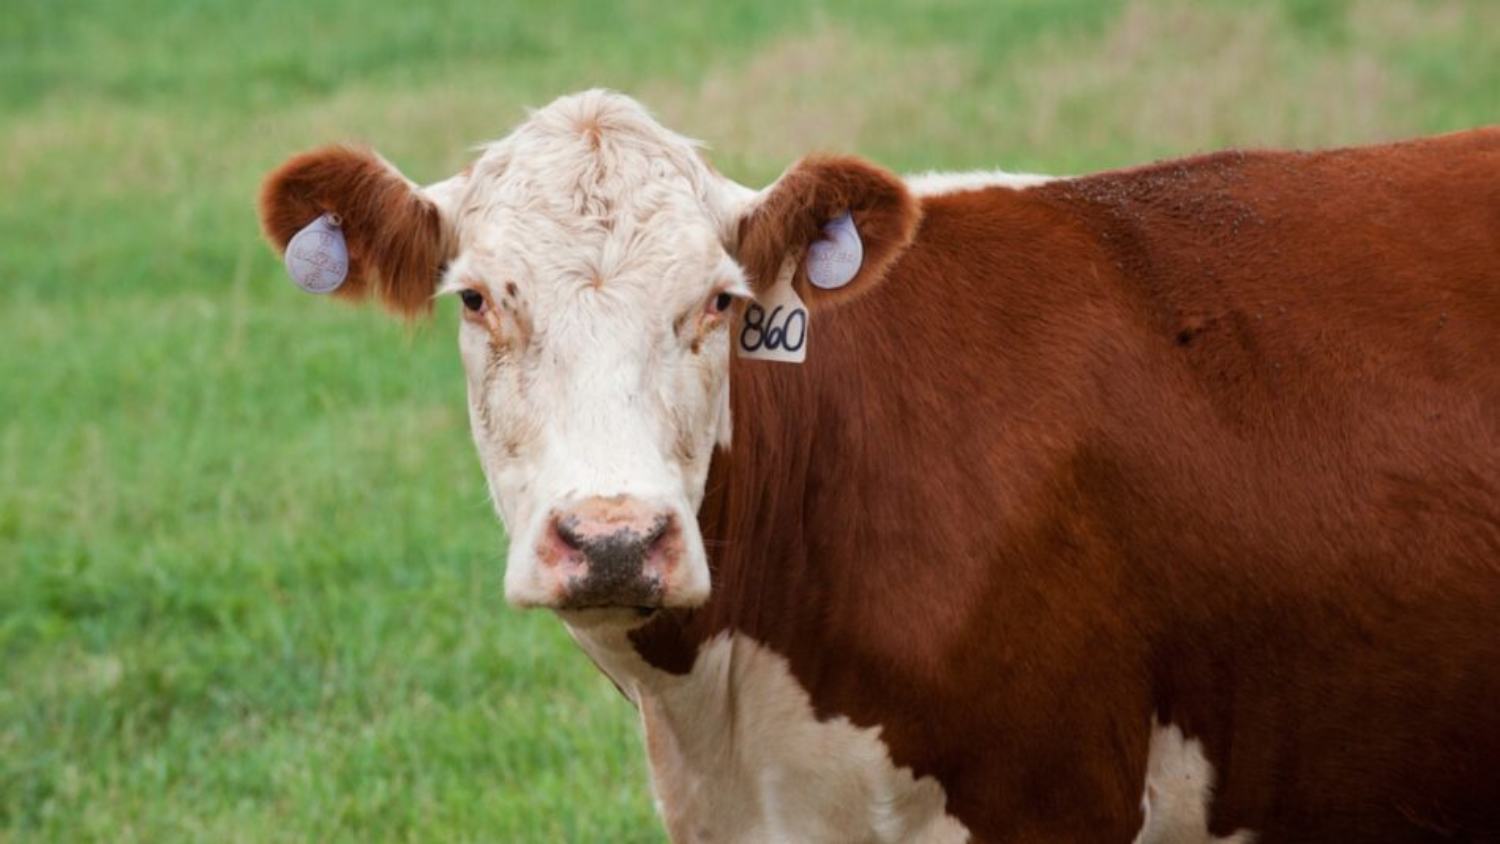 A brown and white cow in a field